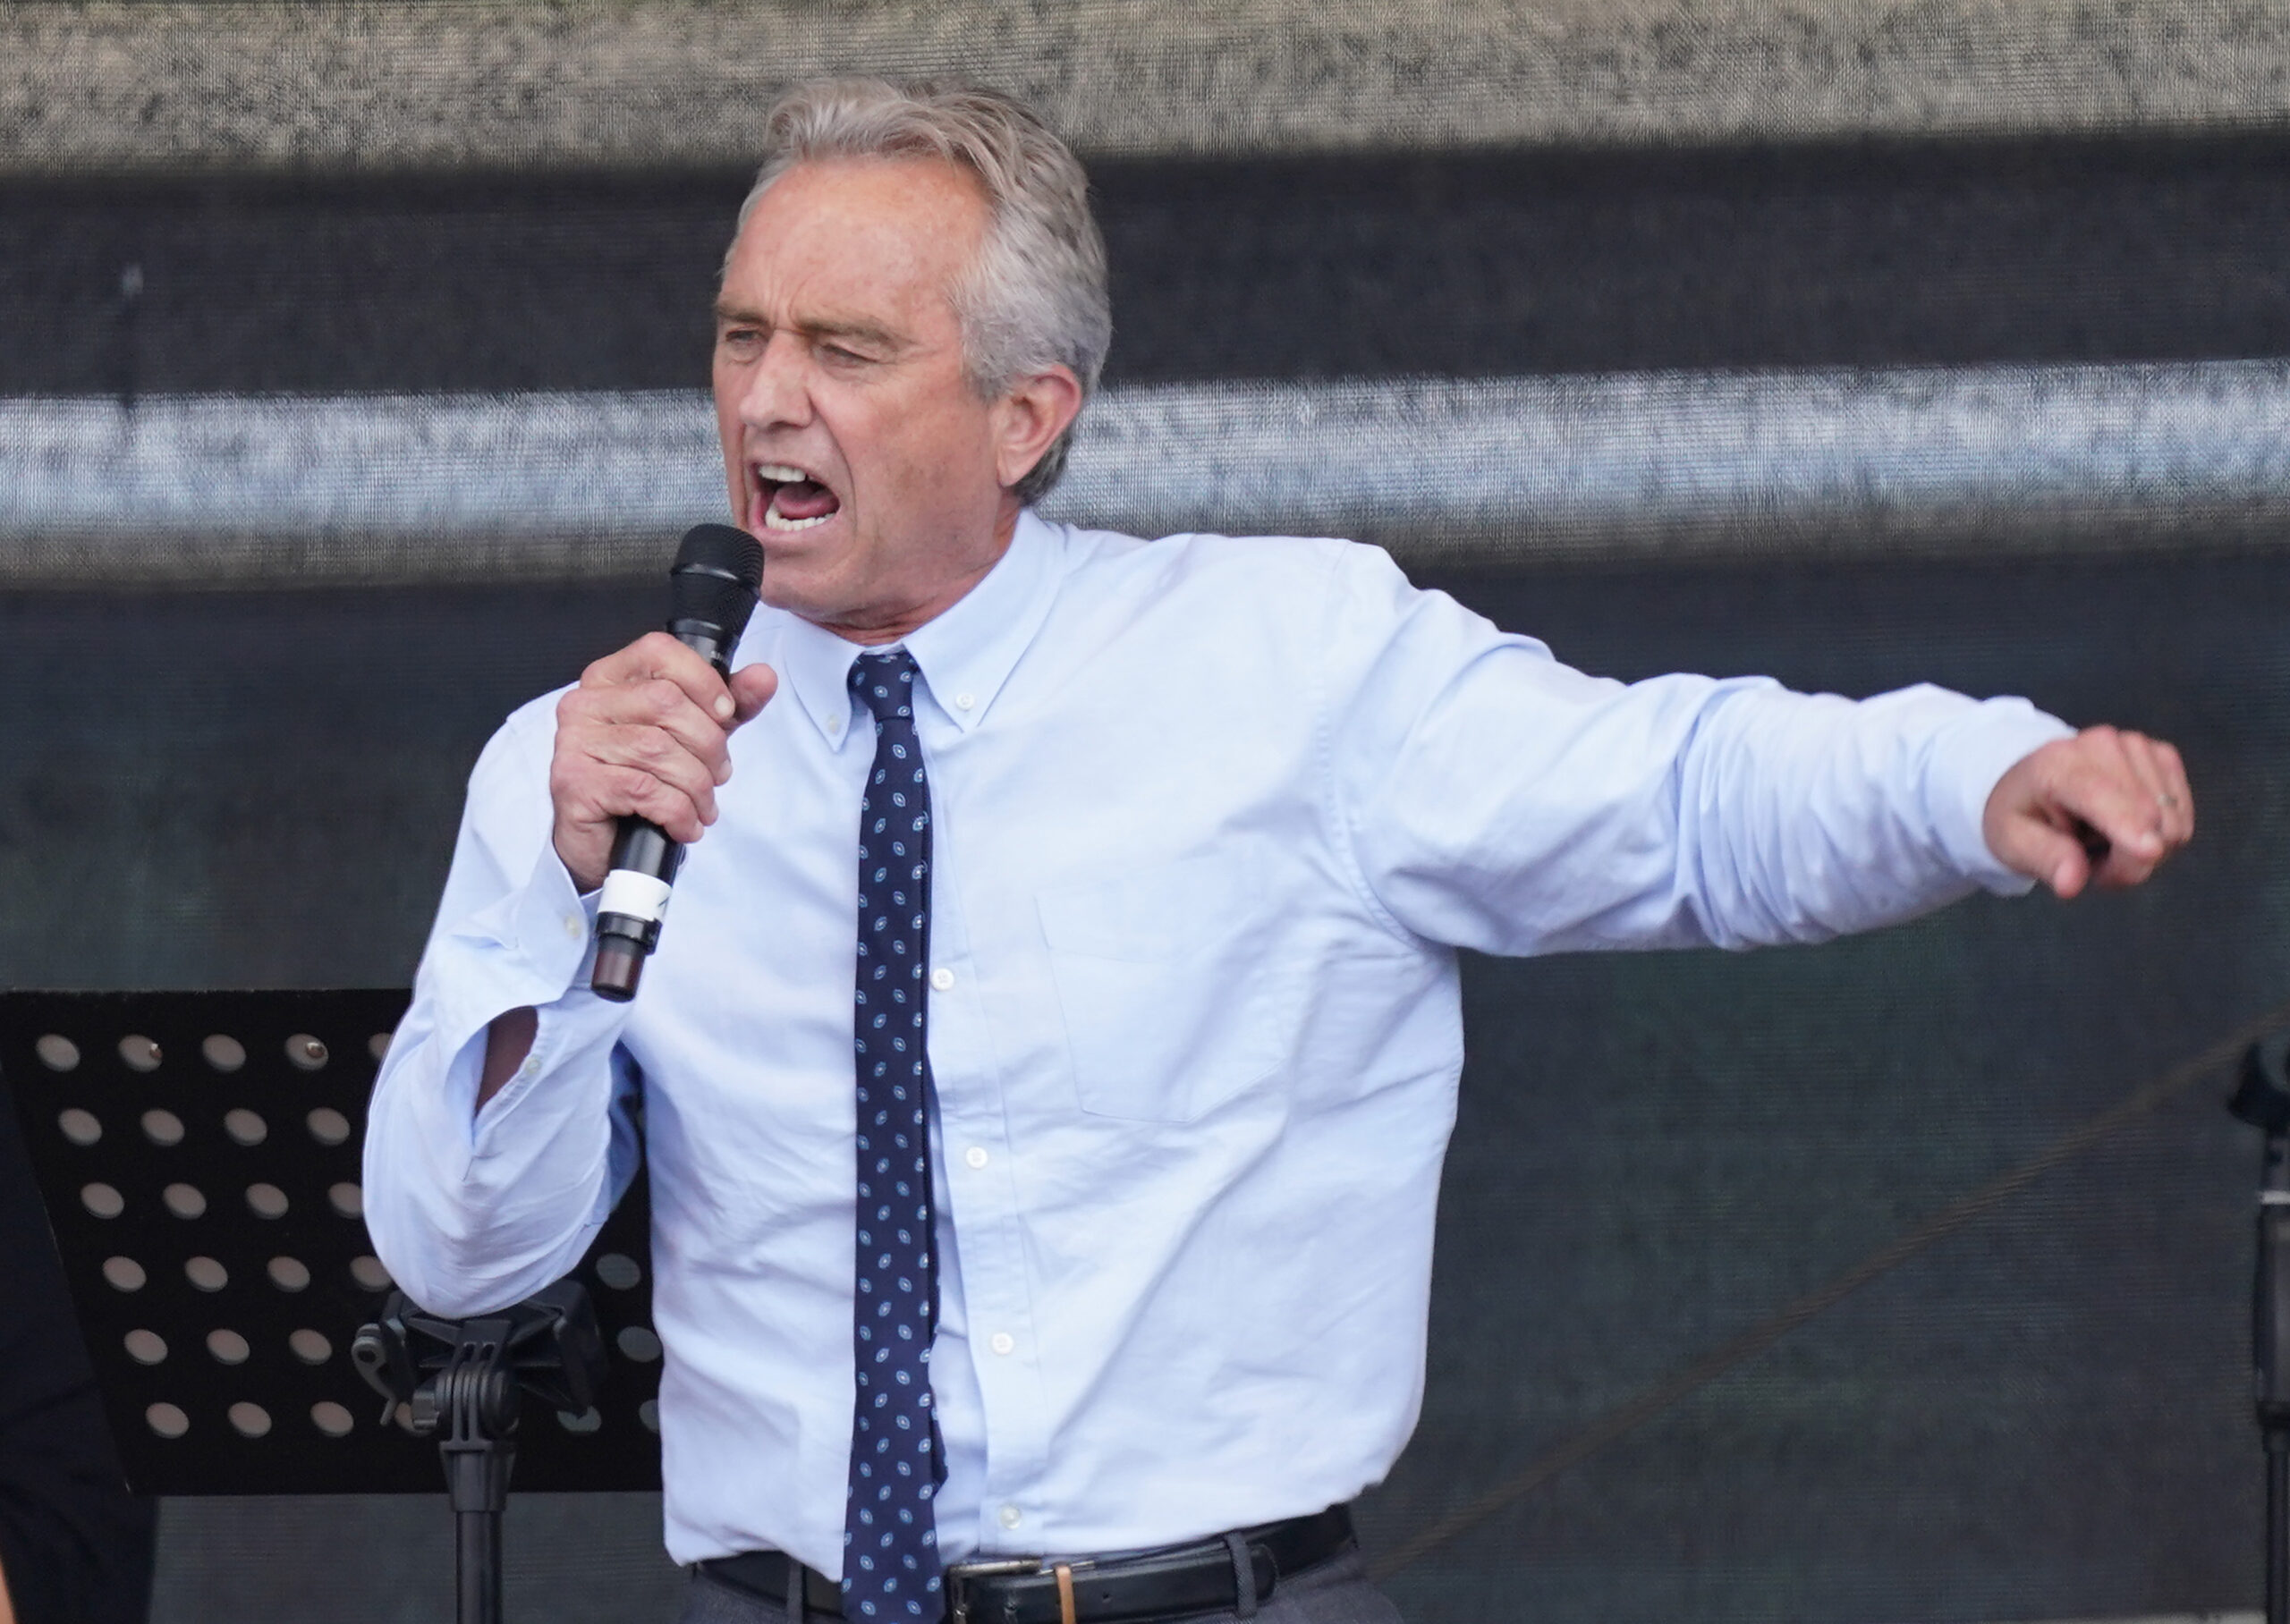 Robert F. Kennedy Jr. challenges Democratic Party’s insanity.